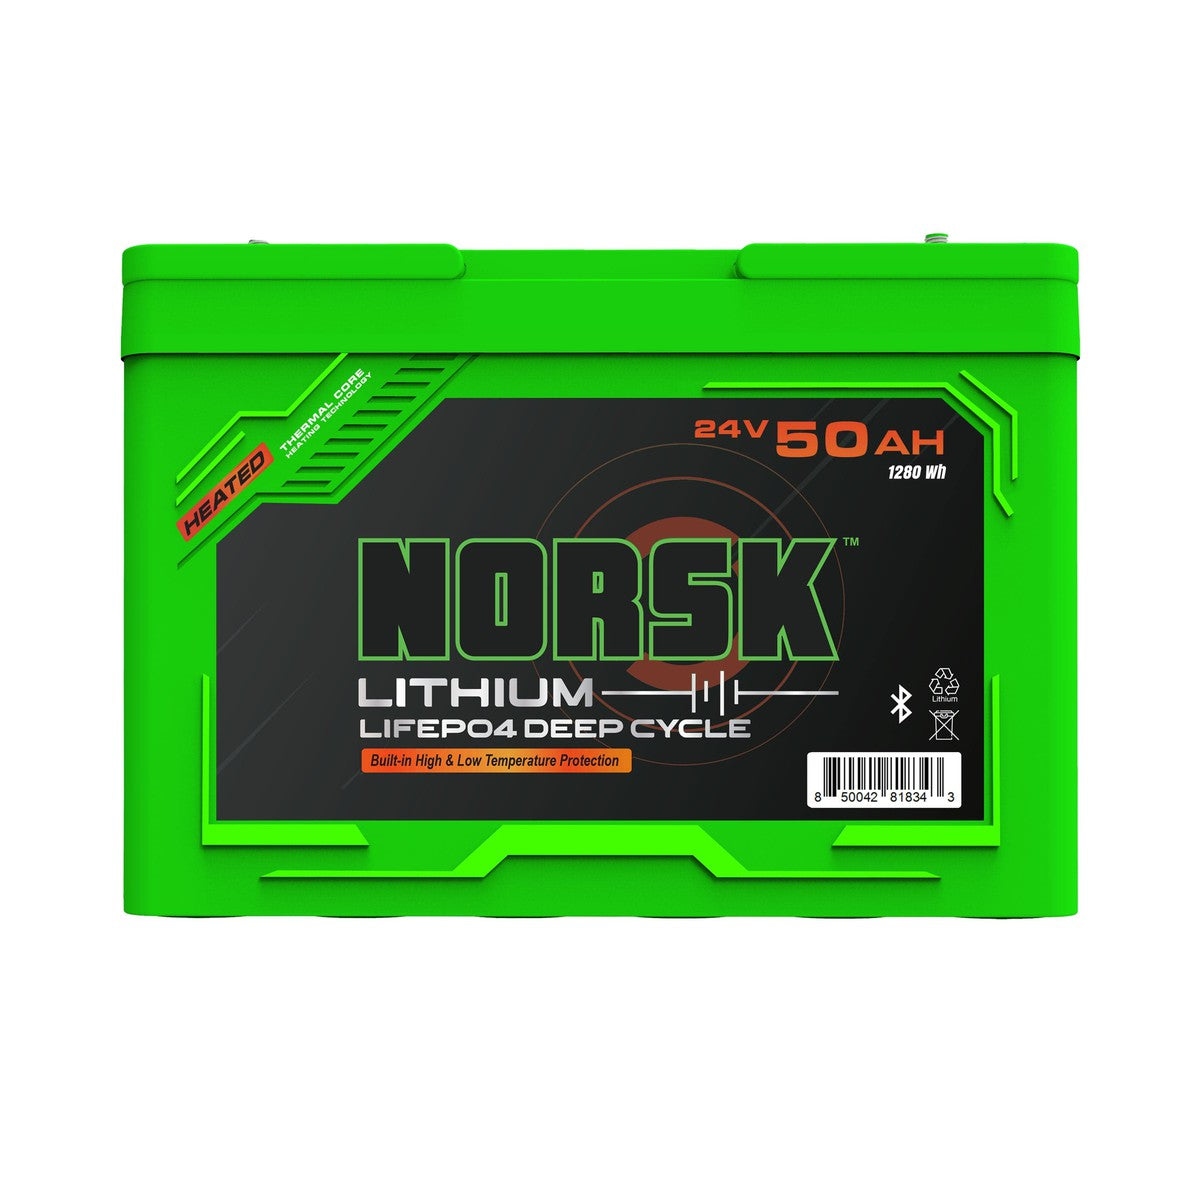 Norsk Qualifies for Free Shipping Norsk LIFEPO4 Battery Guardian Heated 24v 50Ah #23-245H